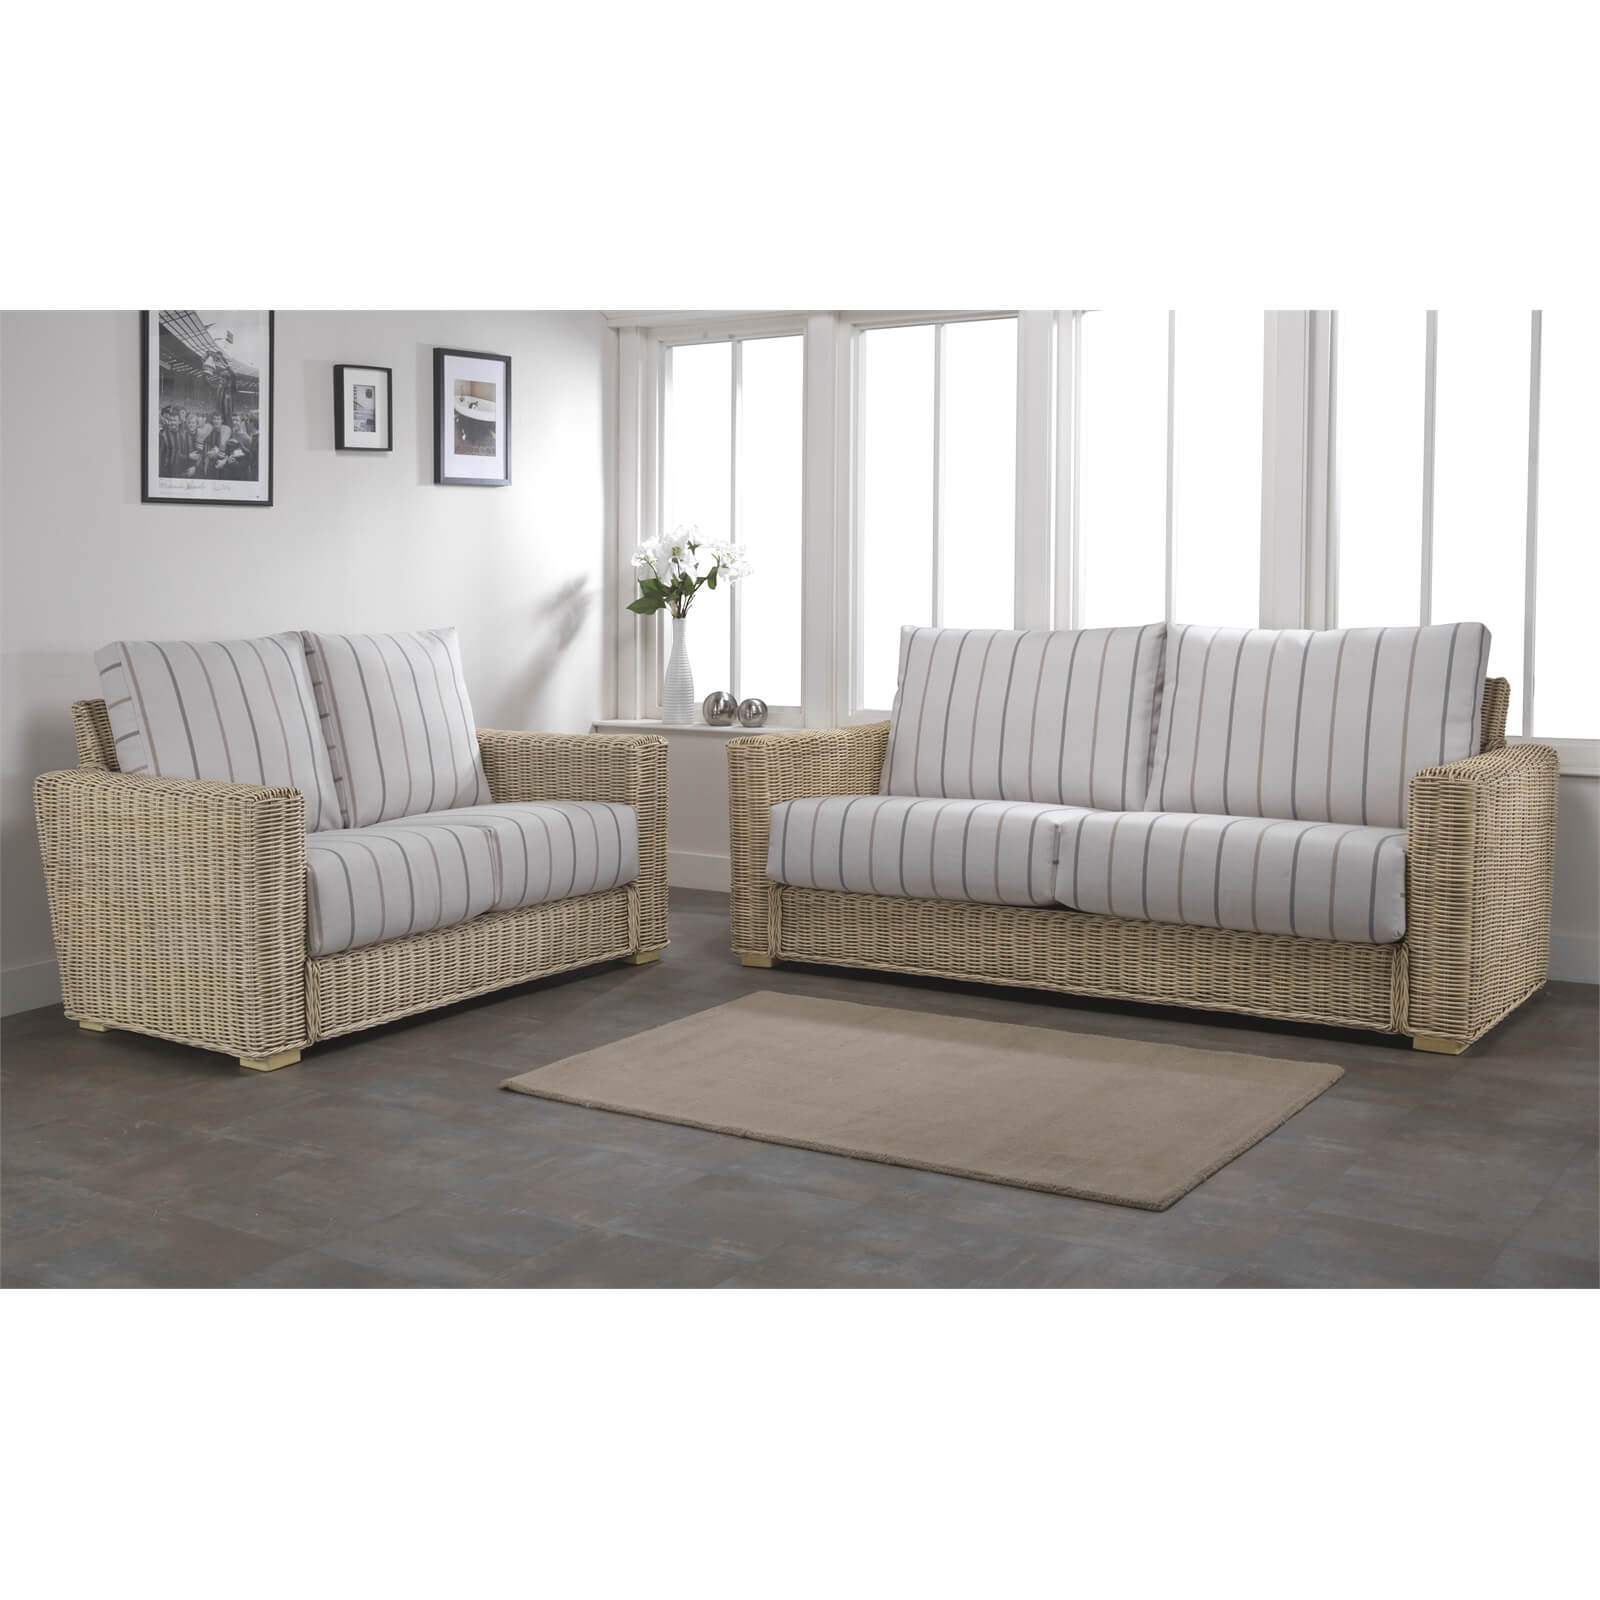 Burford 2 Seater Sofa In Linen Taupe